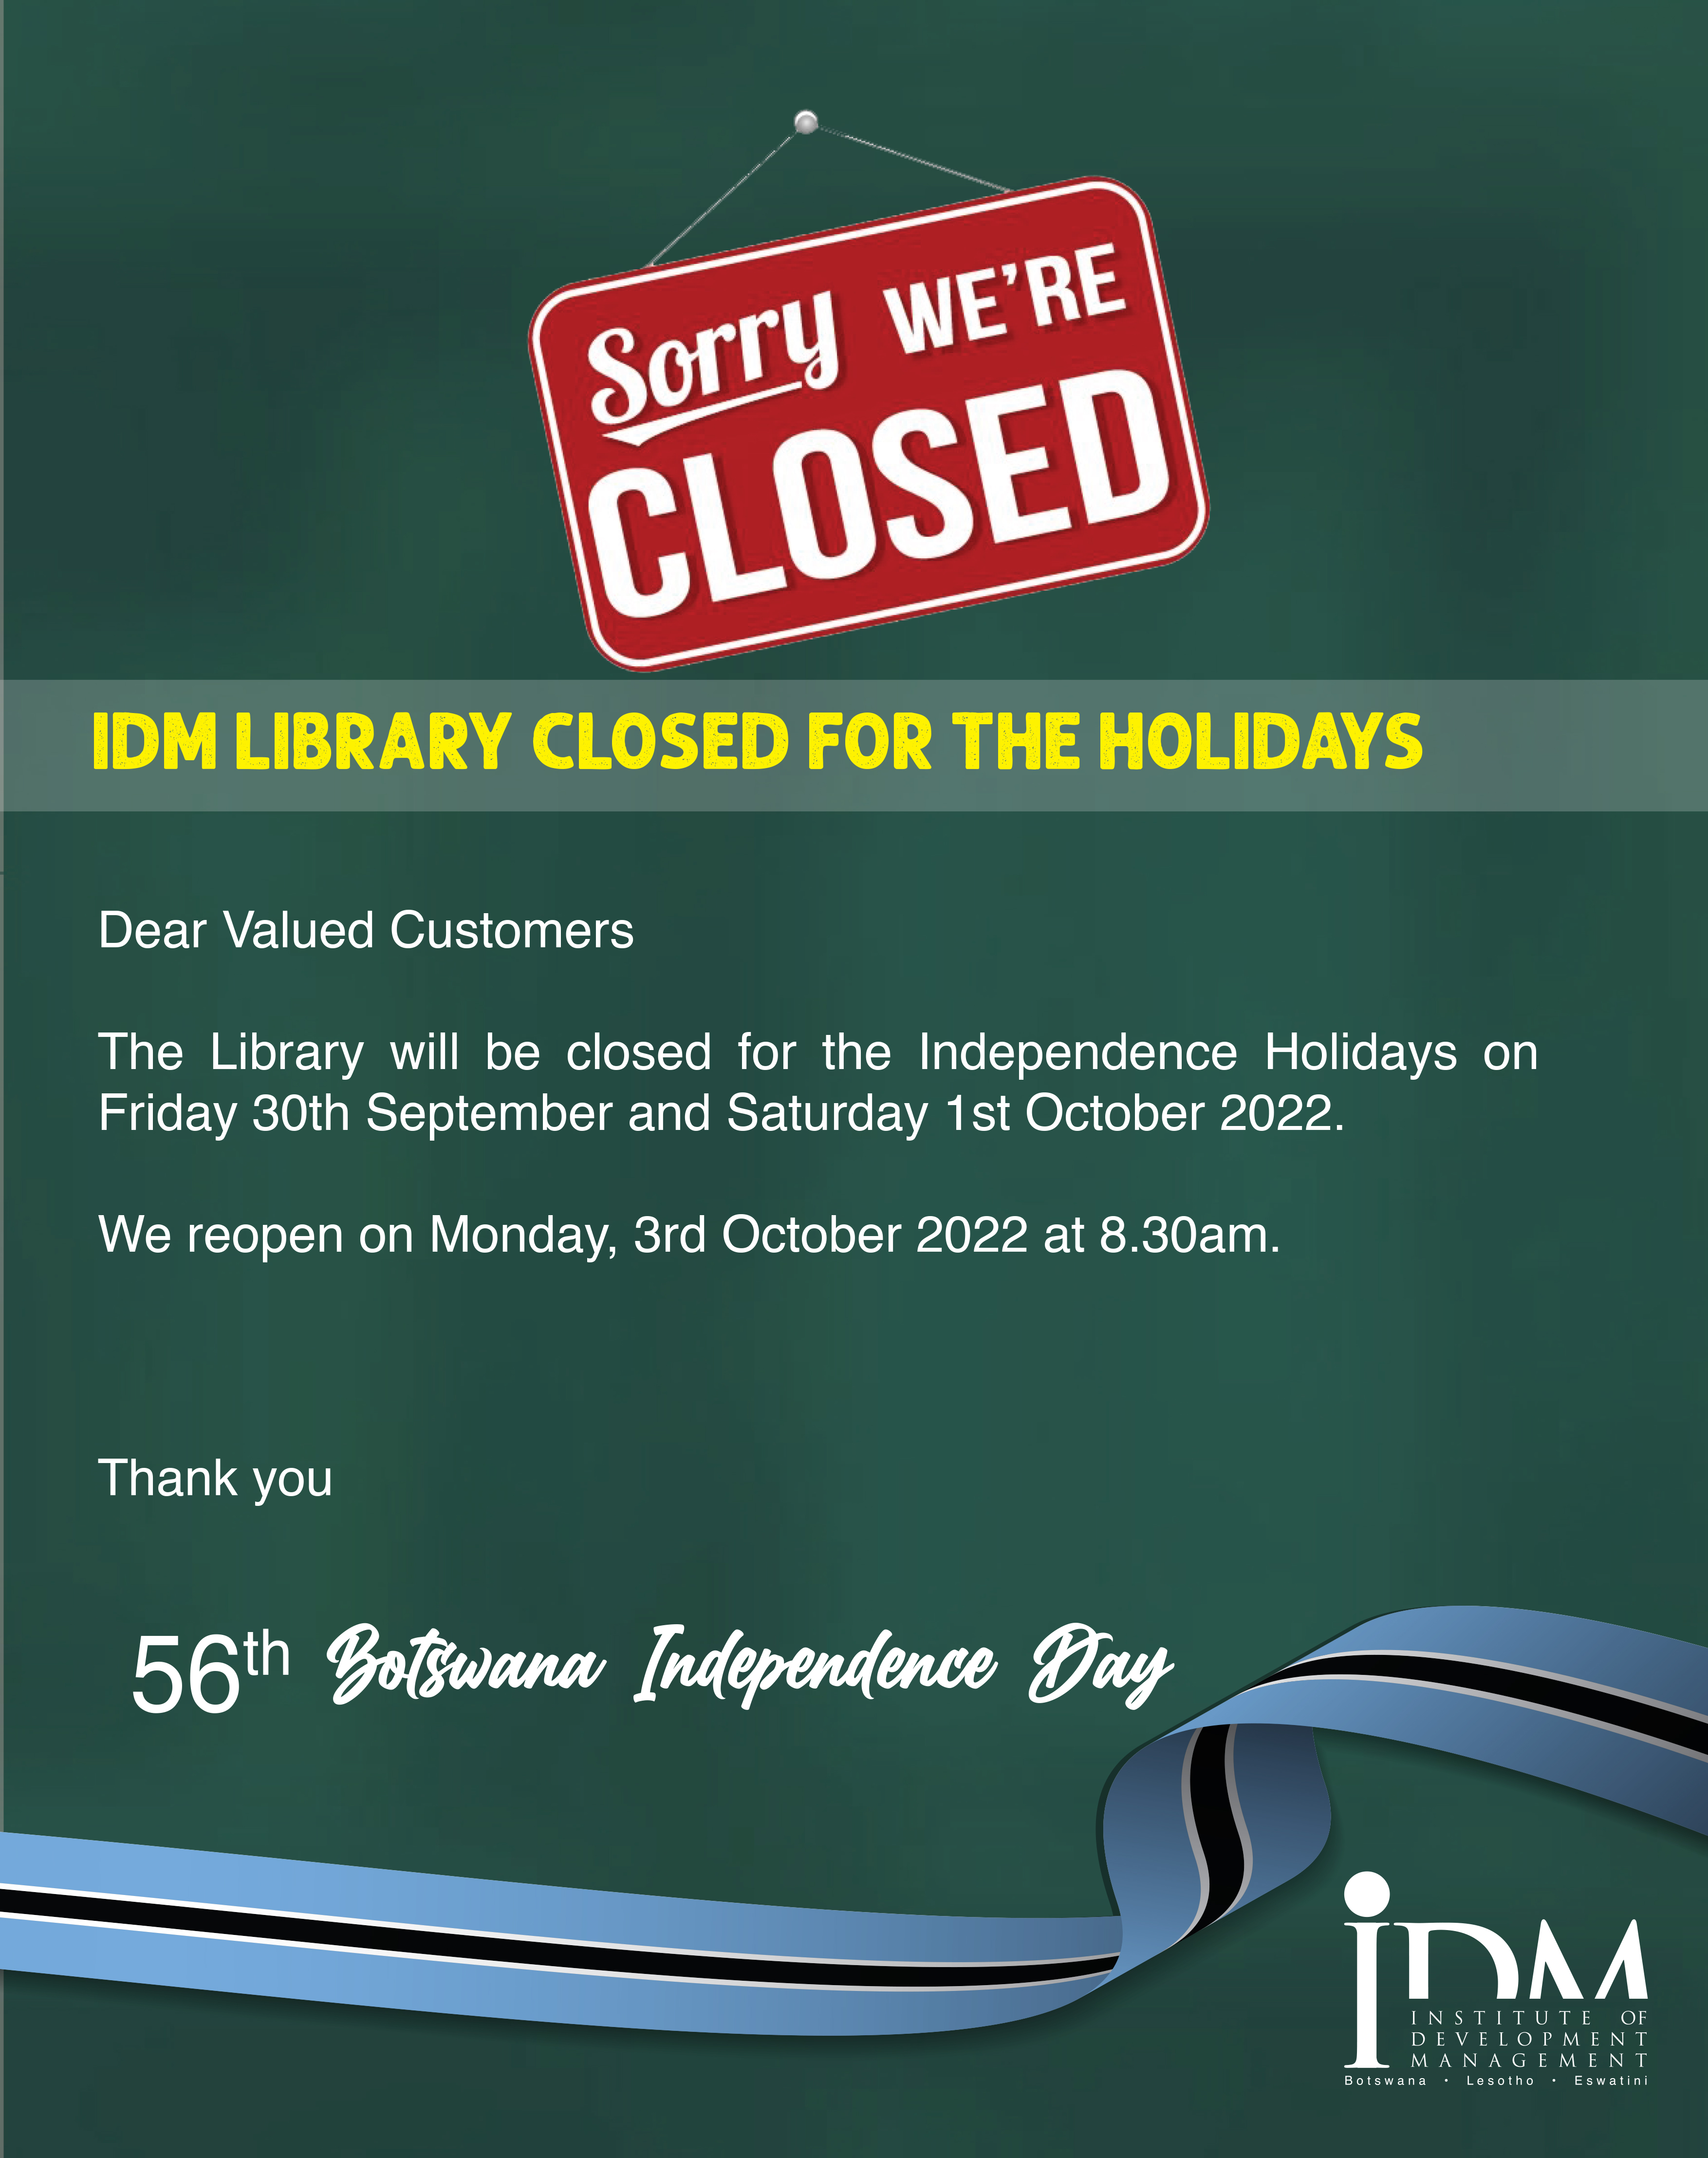 Dear Valued Customers    The Library will be closed for the Independence Holidays on Friday 30th September and Saturday 1st Oct